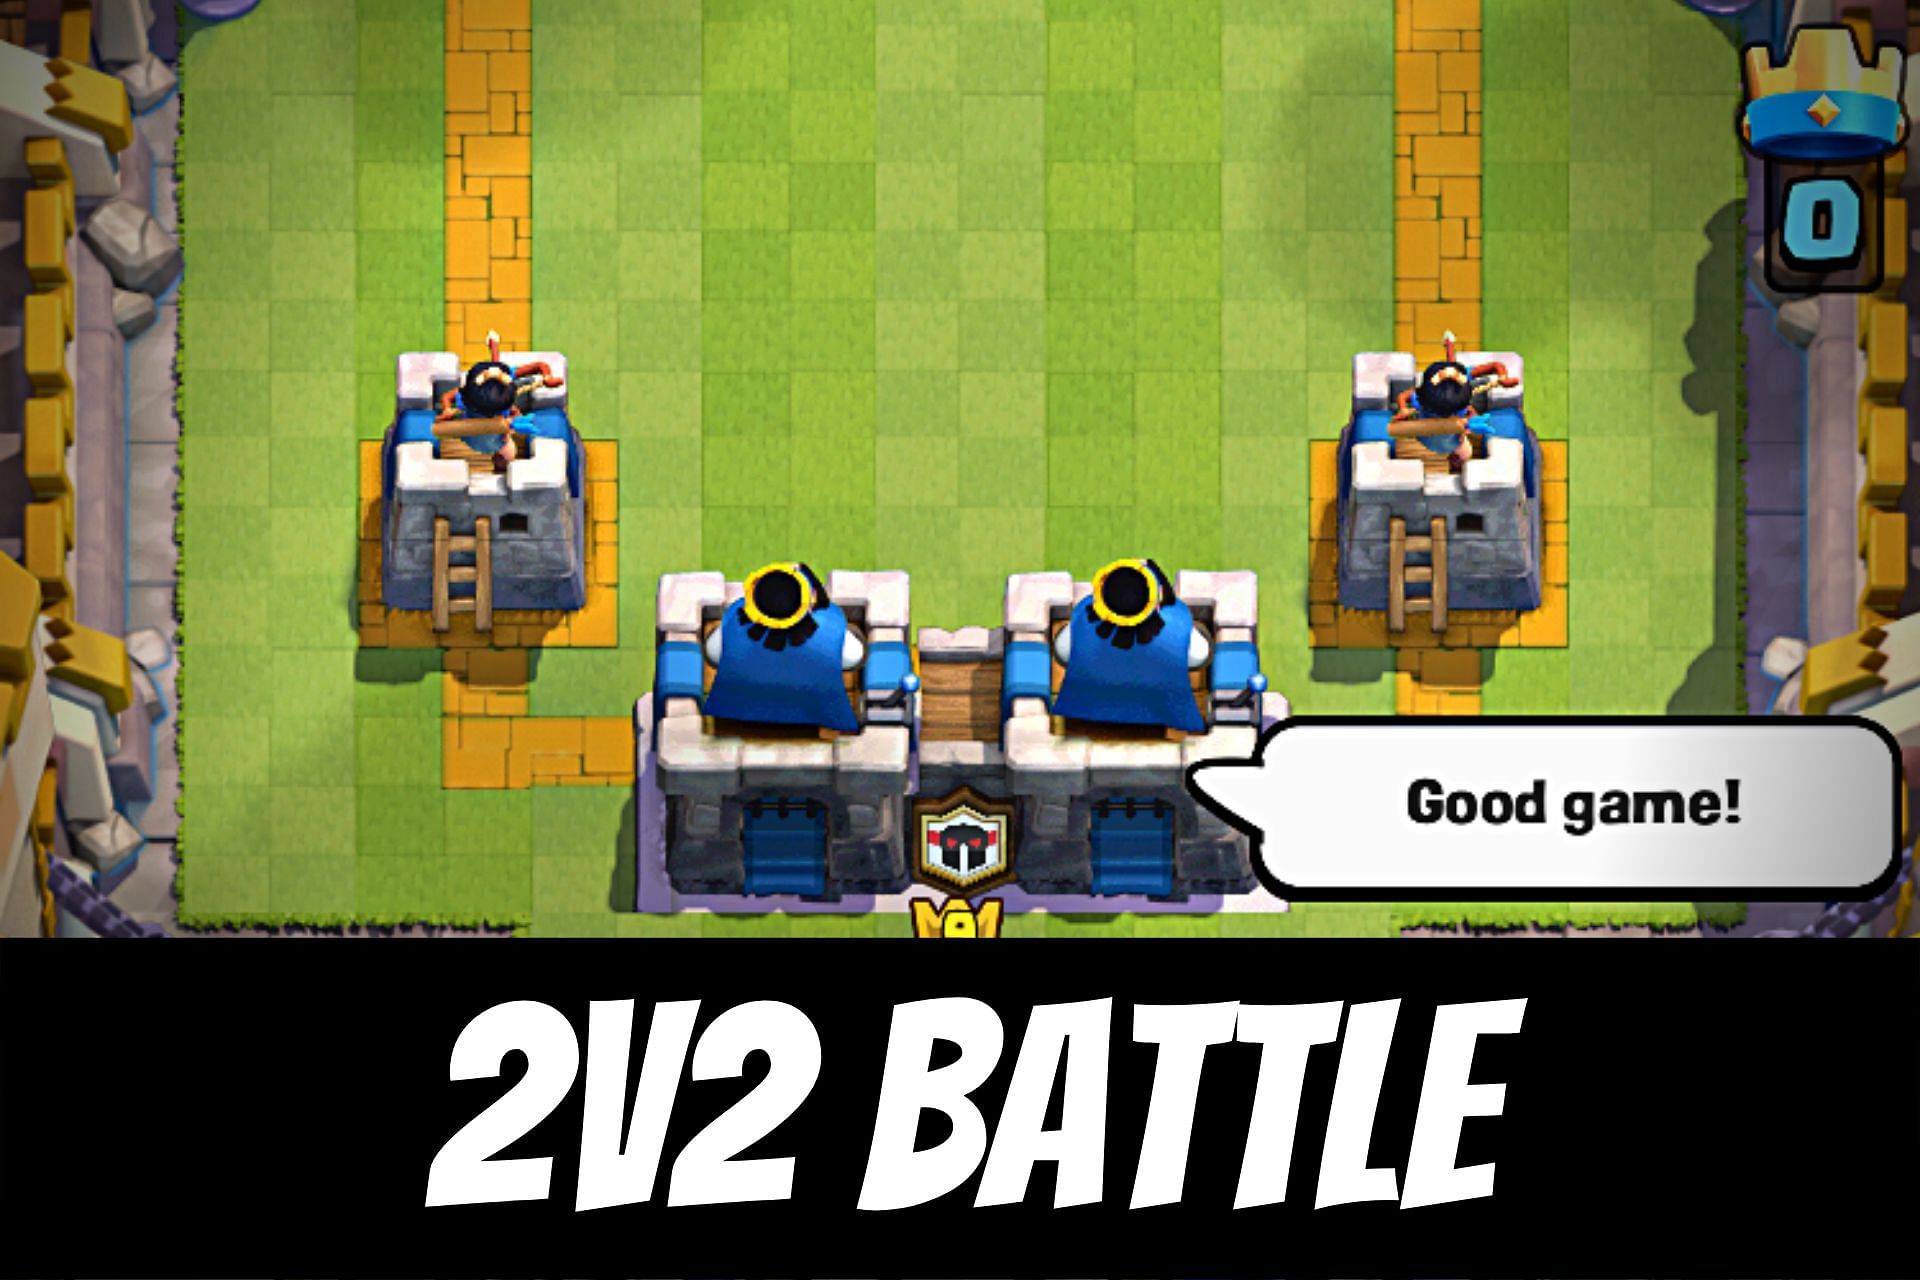 Clash Royale' 2V2 Team Battles: New Game Mode Allows Clans To